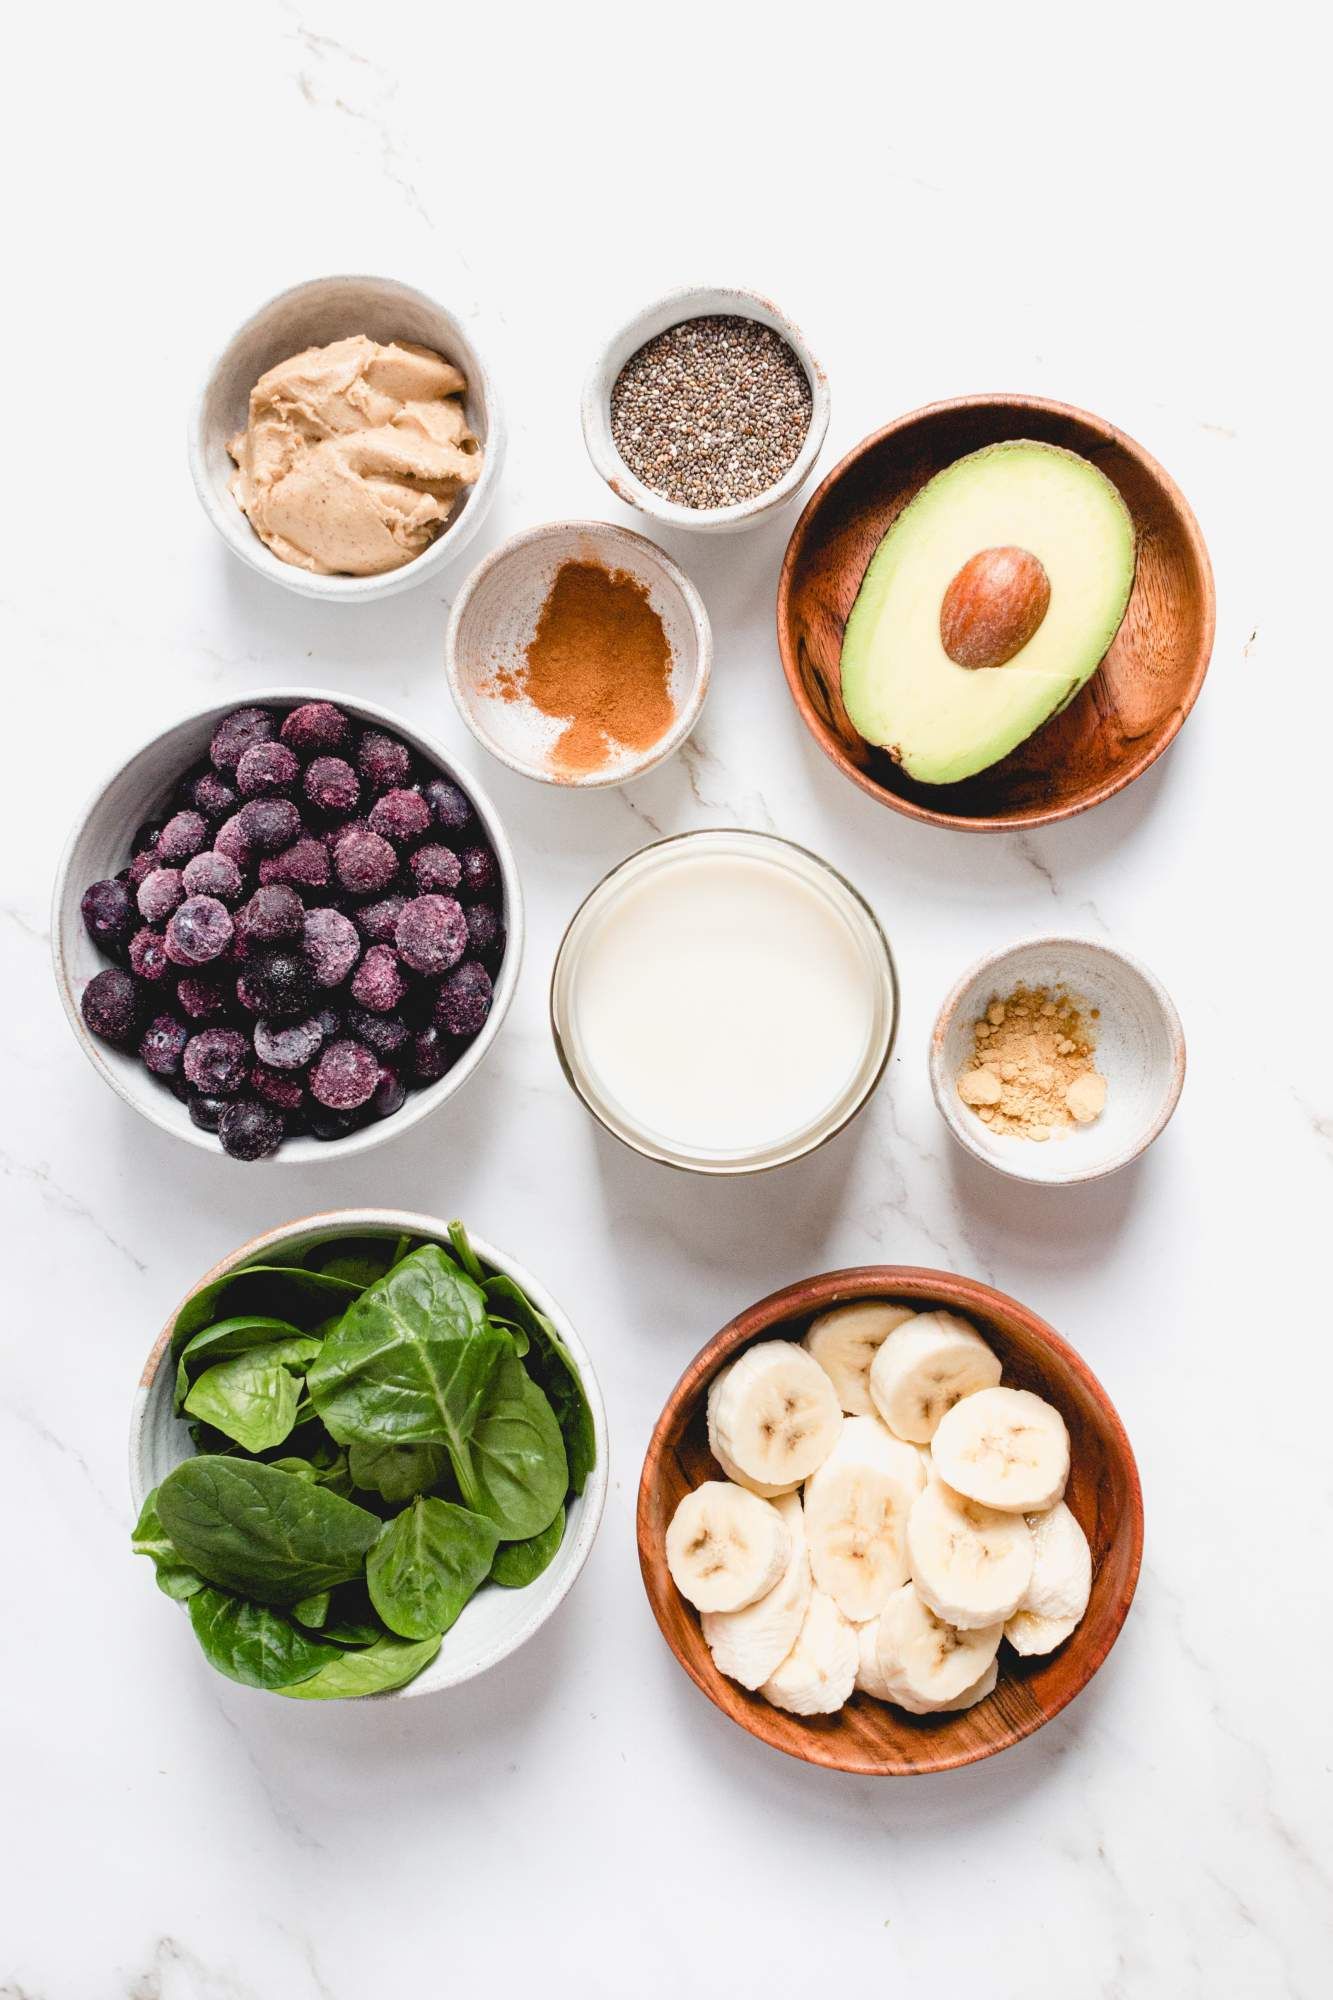 Ingredients for a banana and blueberry smoothie including sliced bananas, almond milk, frozen blueberries, avocado, cinnamon, and more.